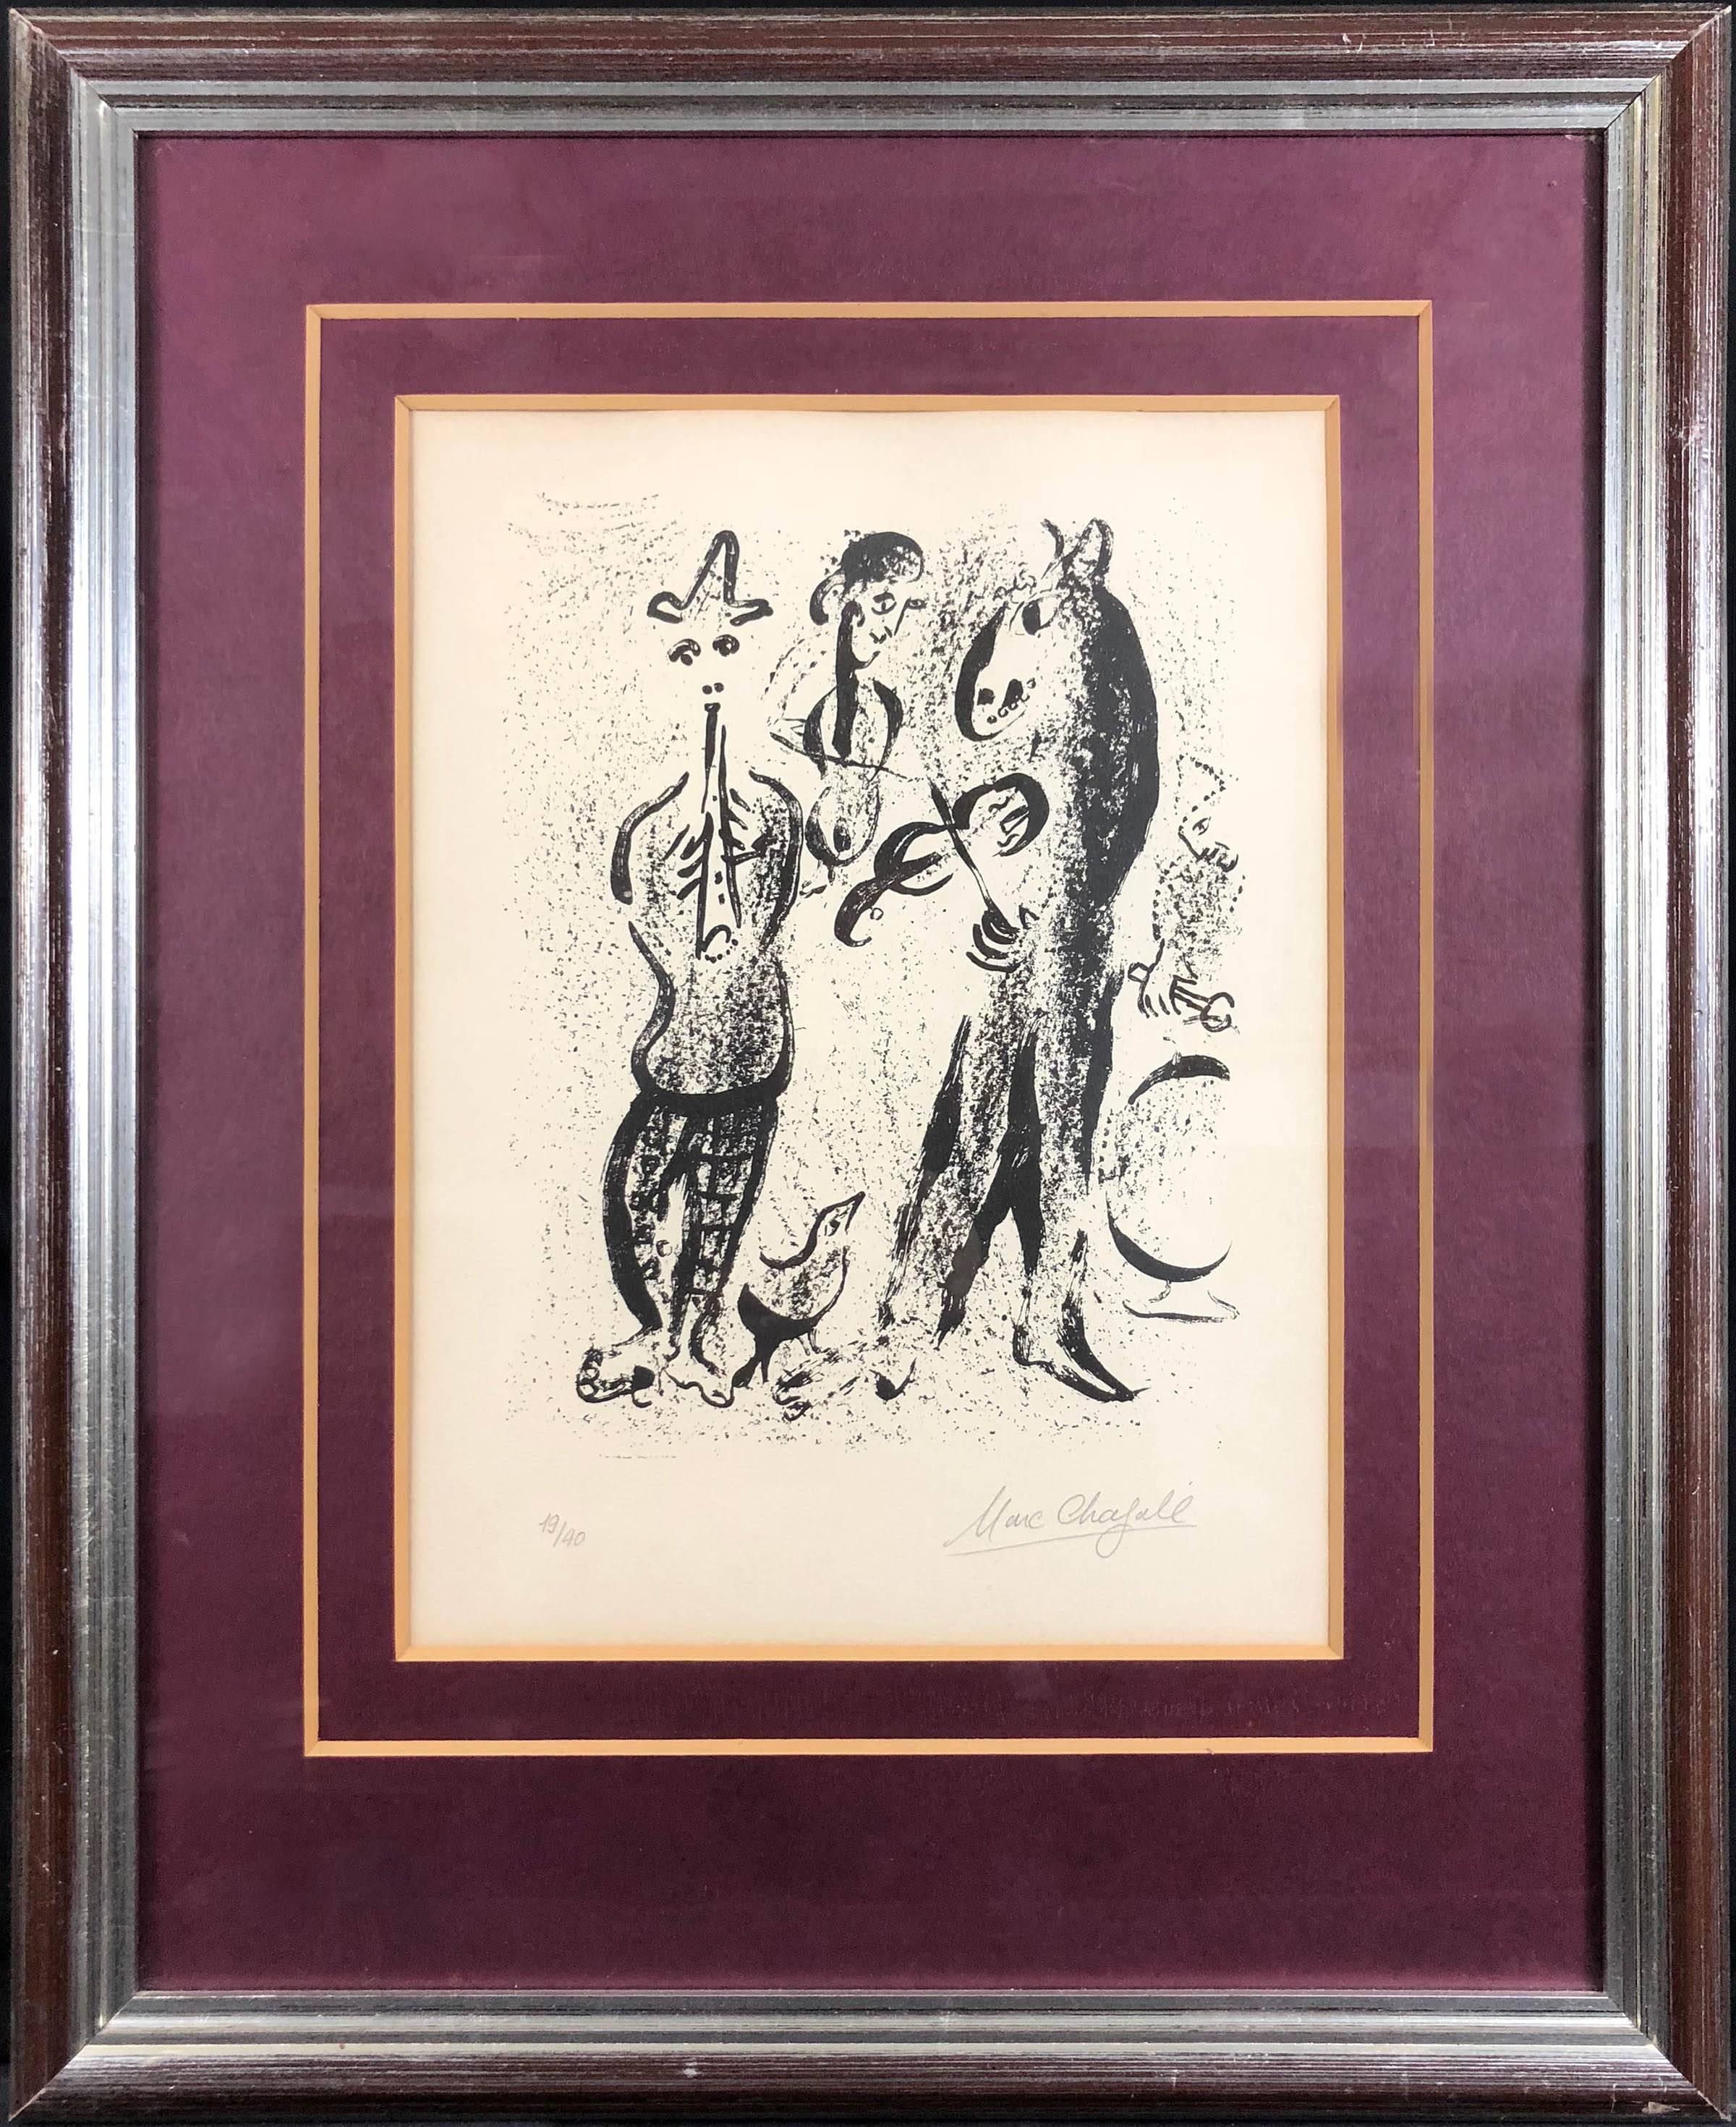 Les Saltimbanques (The Mountebanks) - Print by Marc Chagall